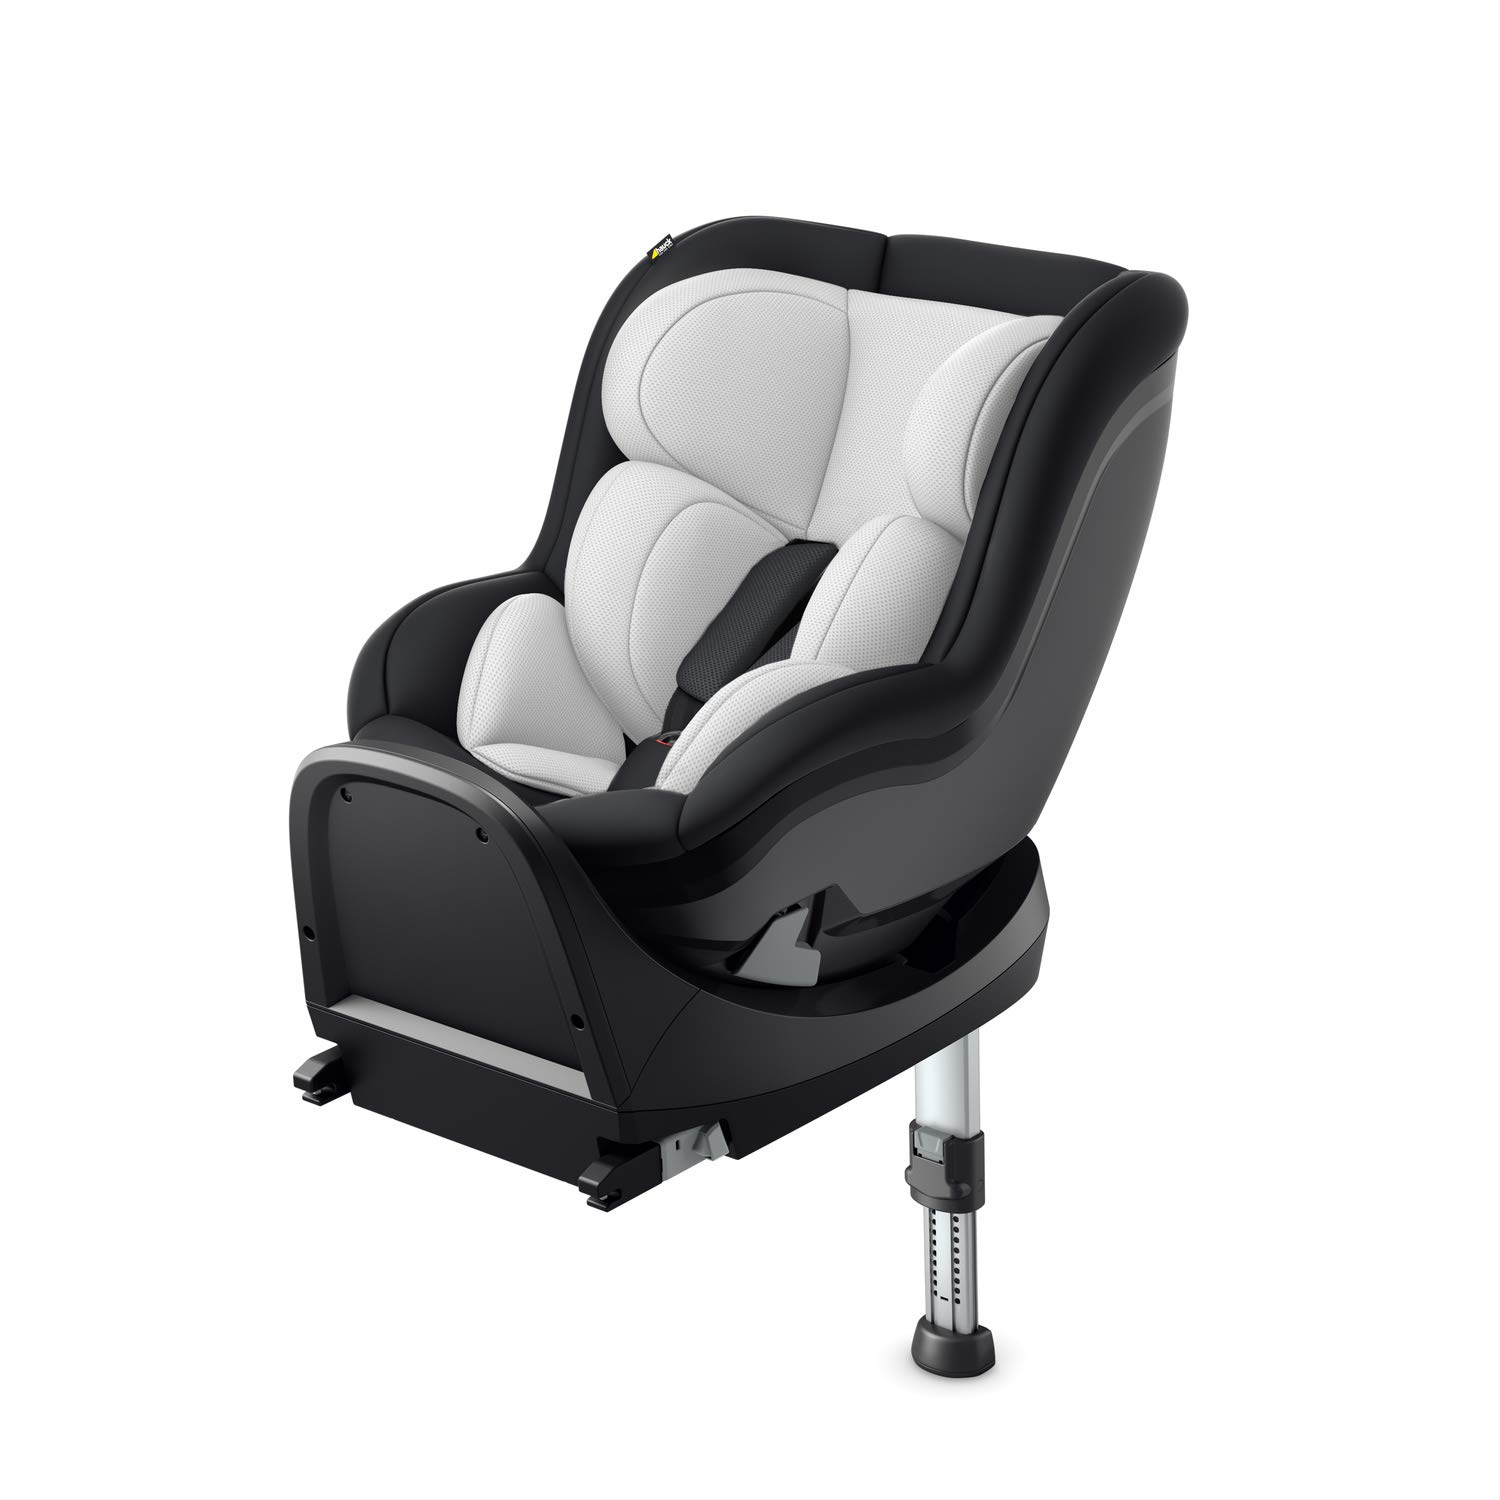 Hauck i-Size Reboard iPro Kids Child Seat with ISOFIX Station / Can be Used from Birth to 105 cm (0 - 18 kg) / ECE R129 / Group 0, 1, 2 / Adjustable Headrest / Removable Washable Cover / Black